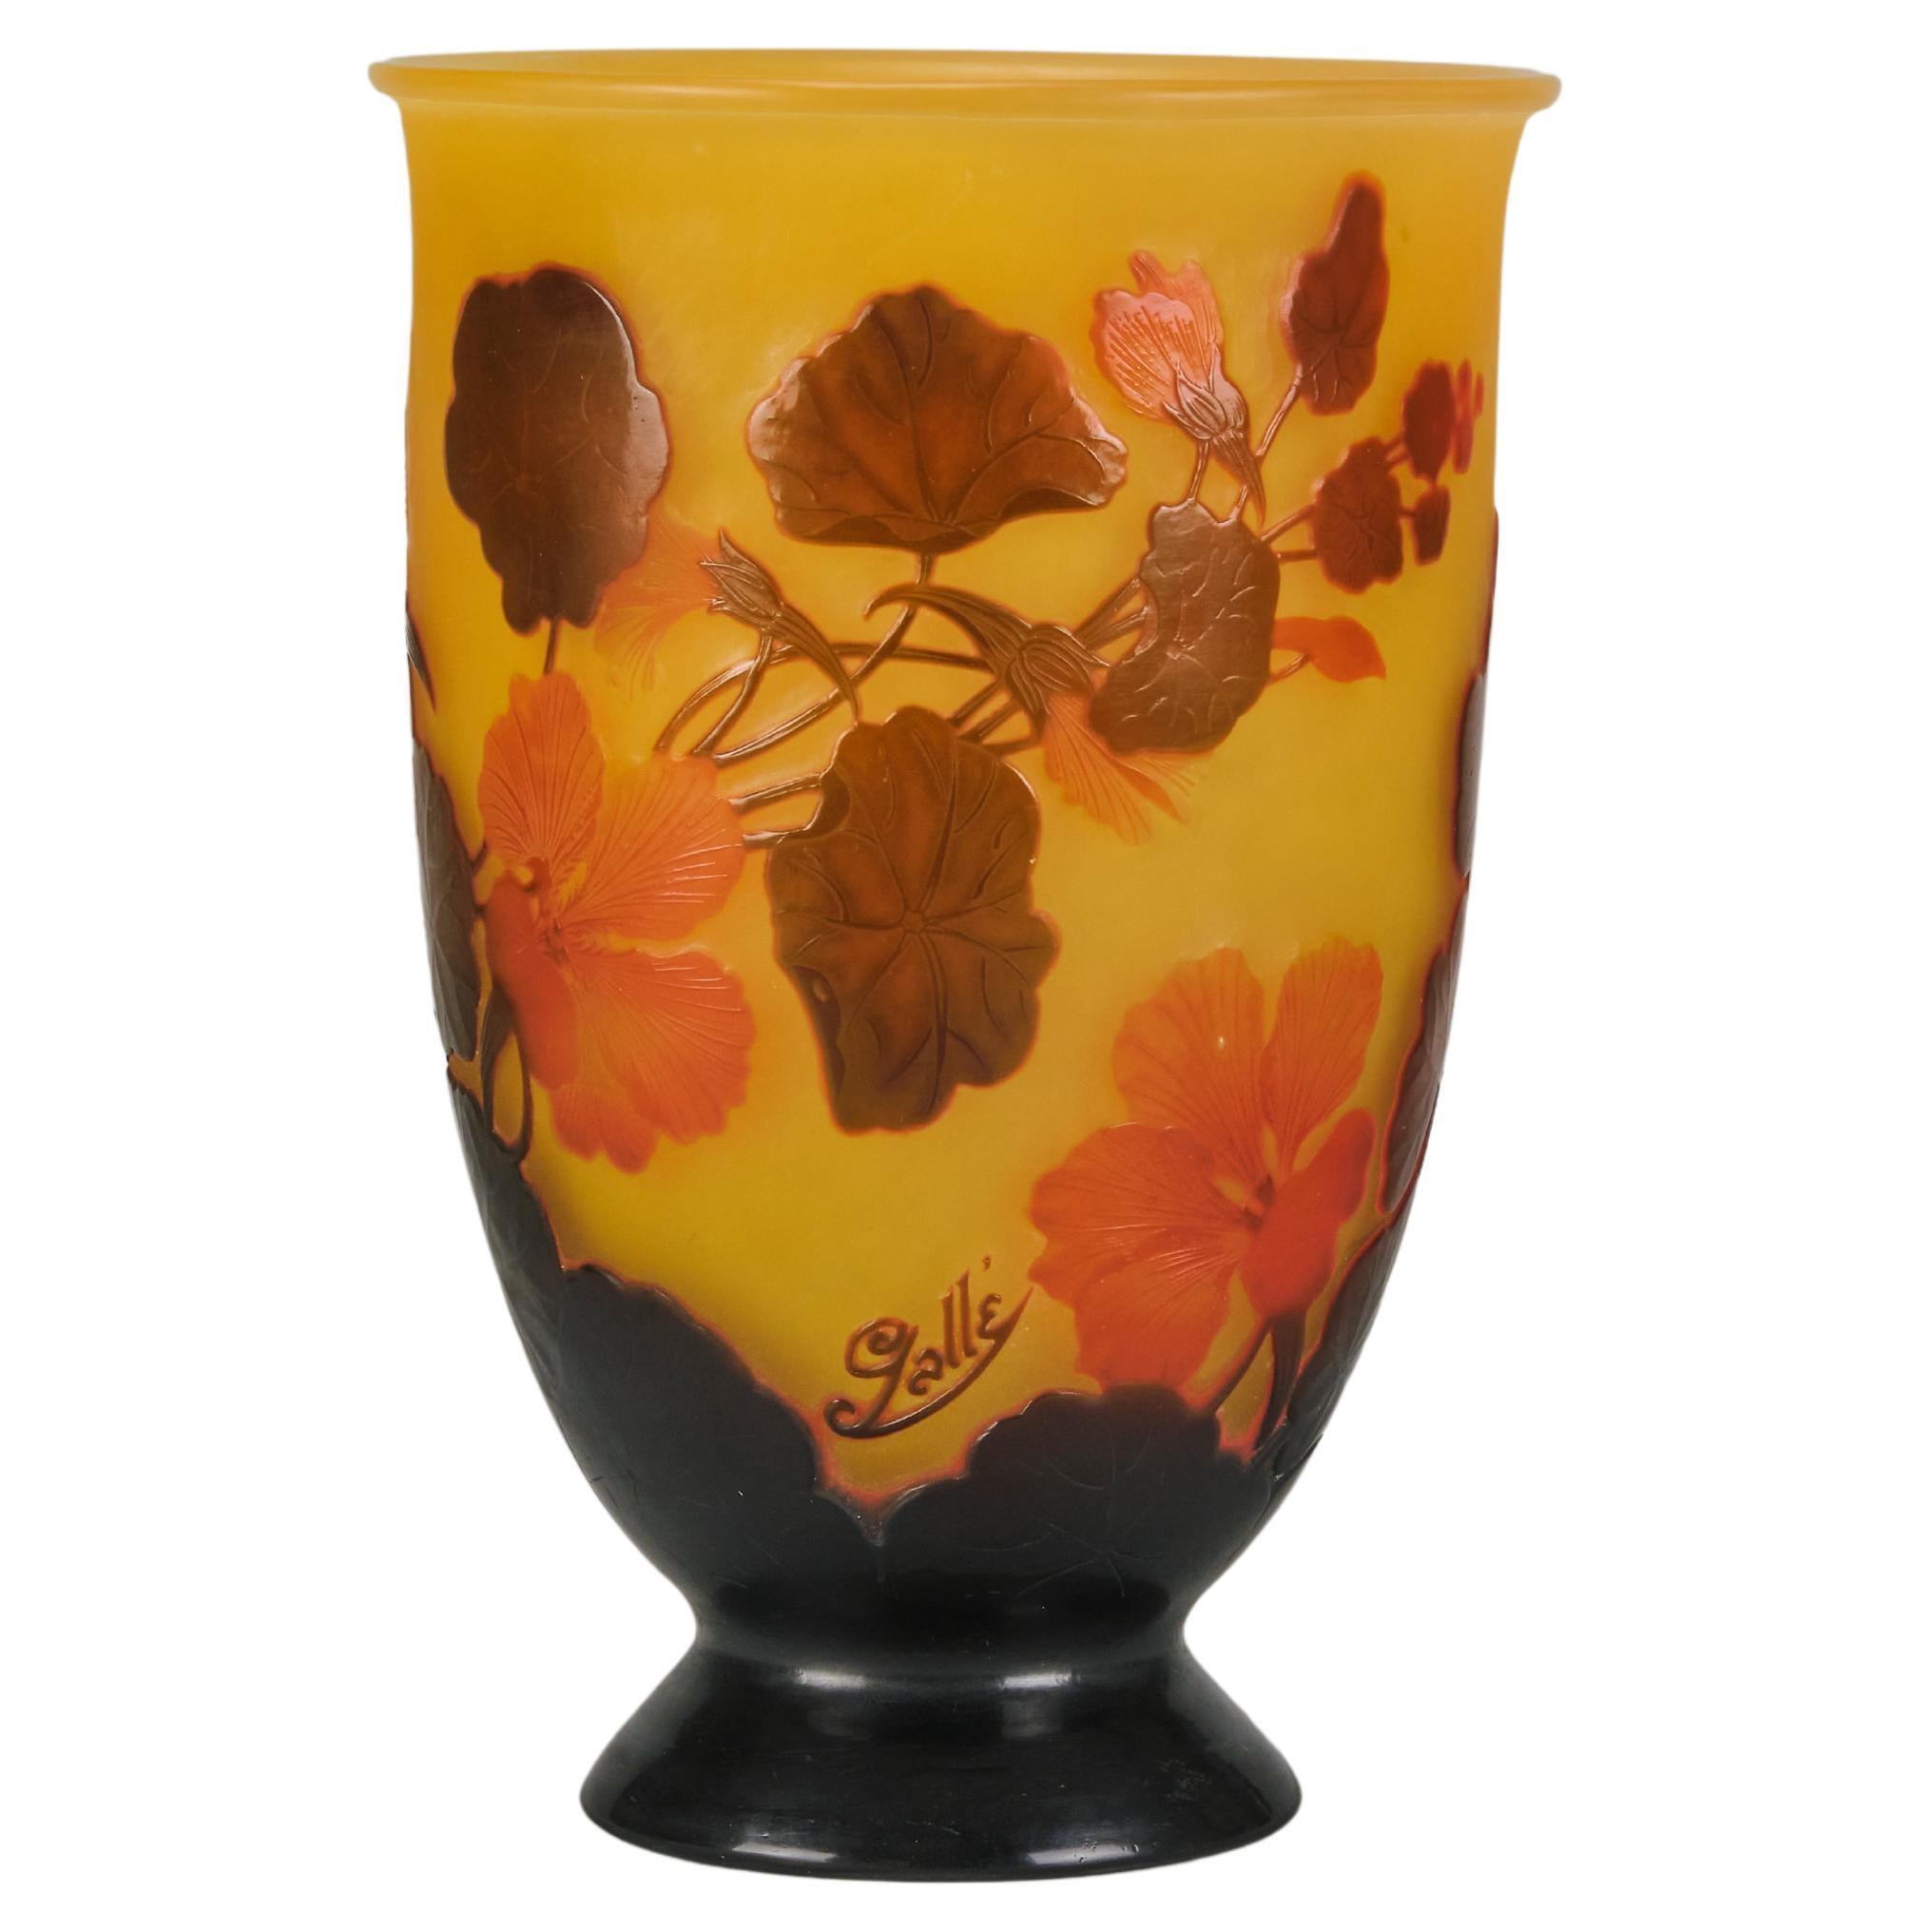 Early 20th Century Cameo Glass Vase Entitled "Nasturtium Vase" by Emile Gallé For Sale